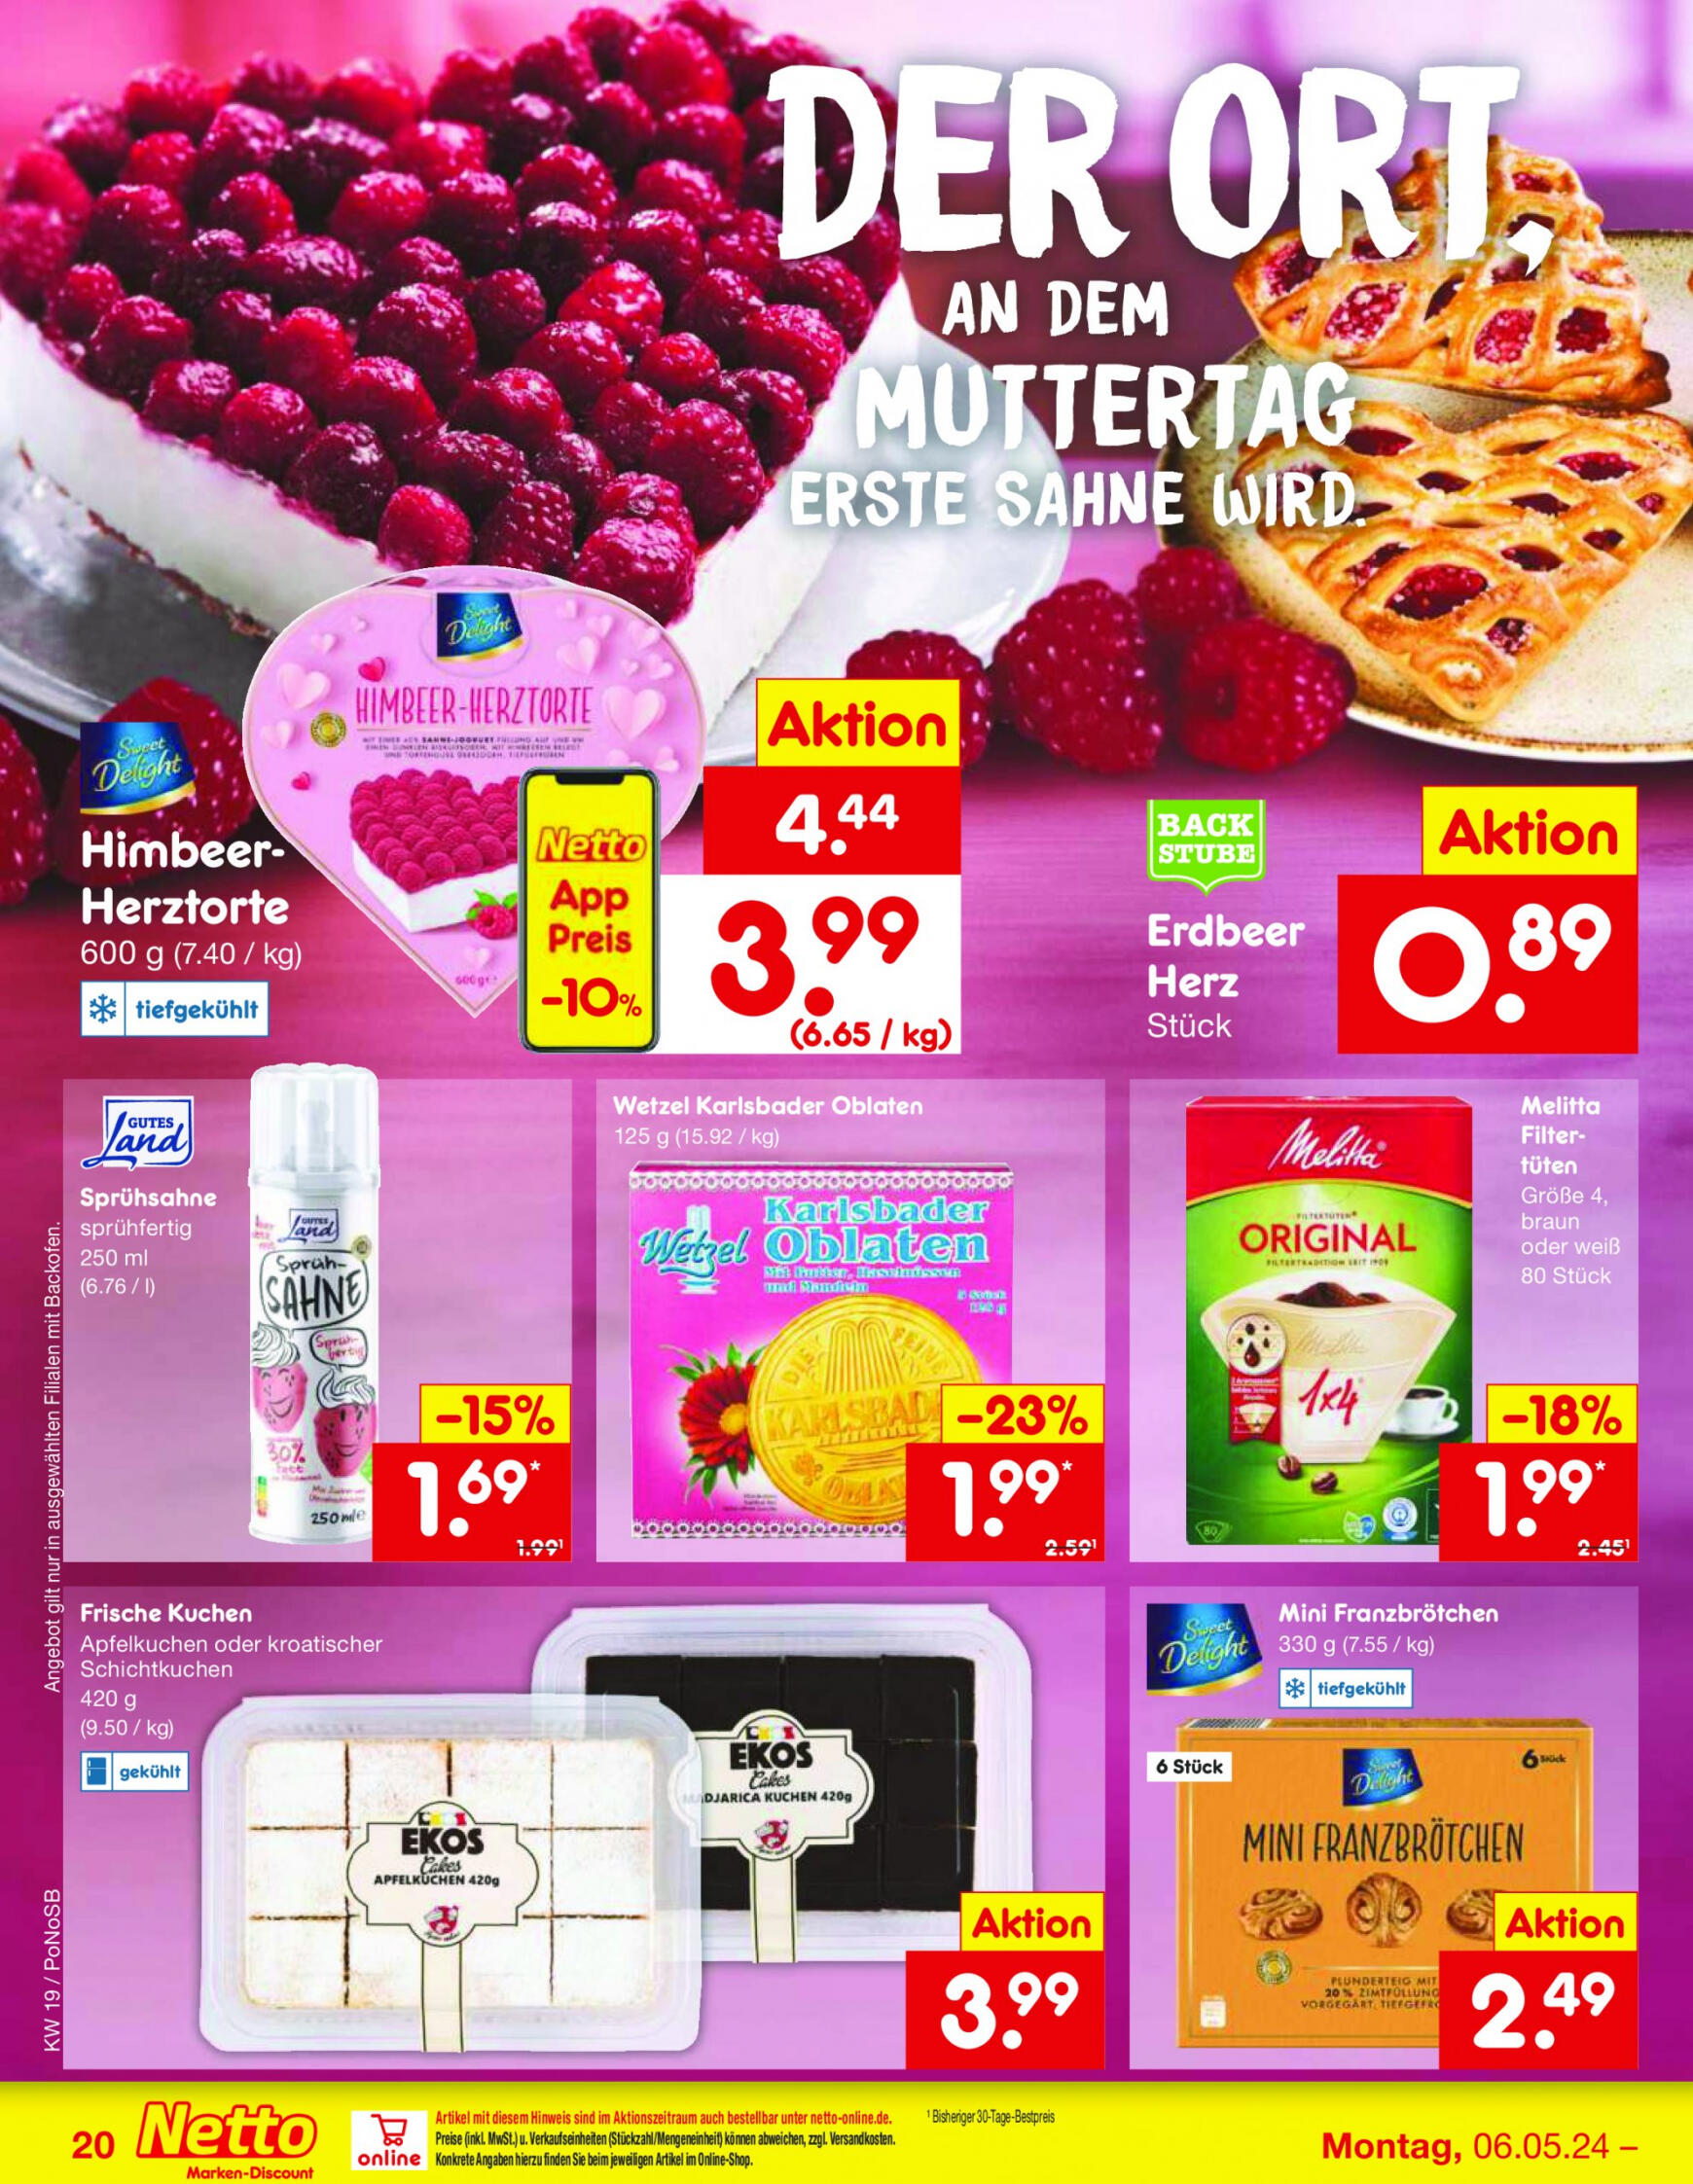 netto - Flyer Netto aktuell 06.05. - 11.05. - page: 28